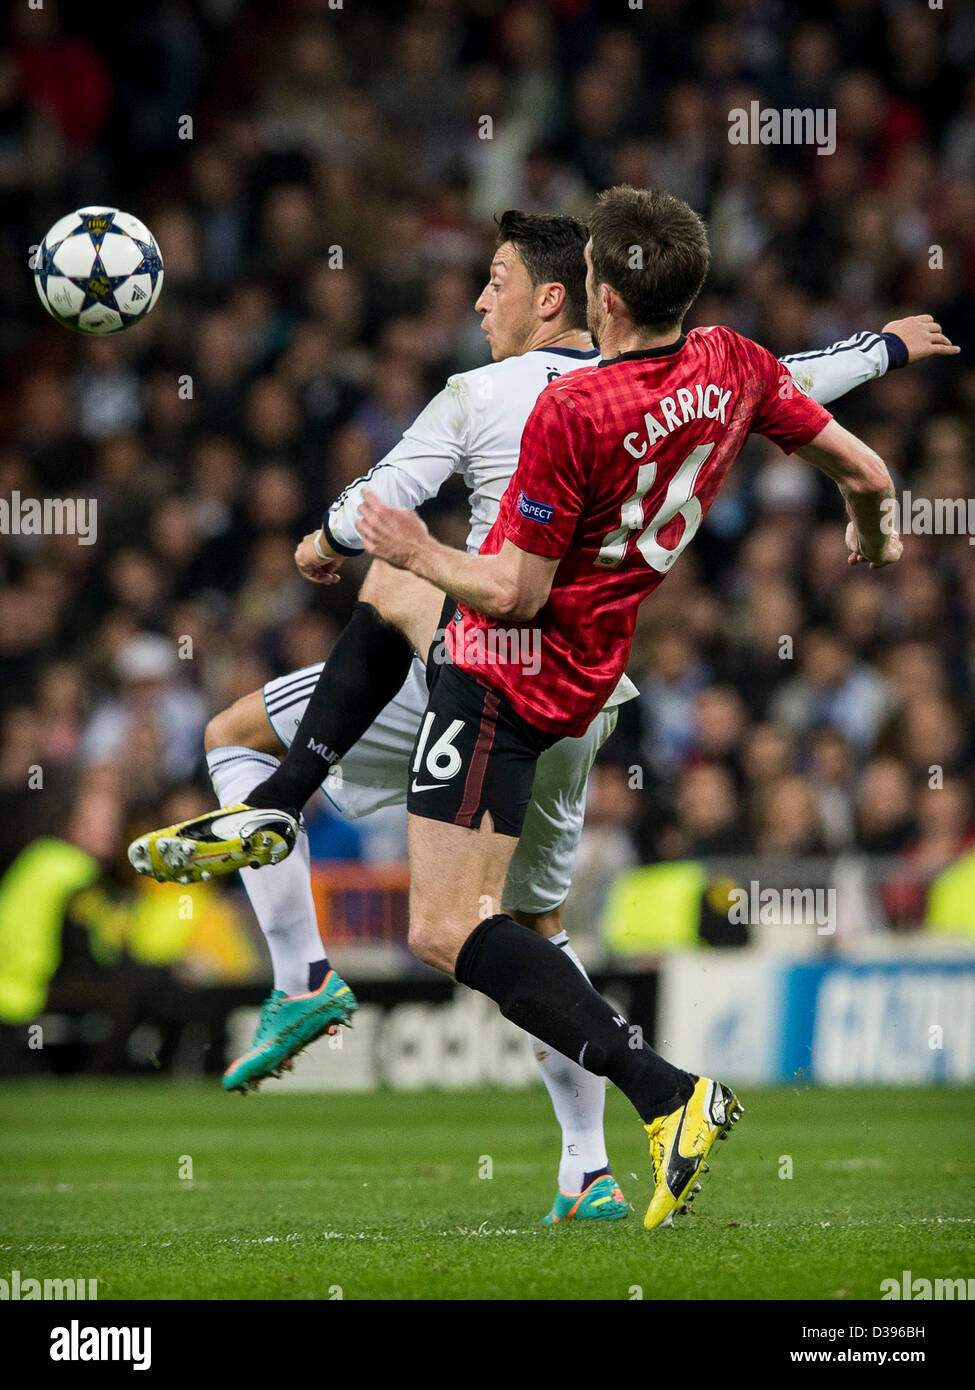 Madrid, Spain. 13th Feb, 2013.  Midfielder Michael Carrick of Manchester United (R) challenges for the ball with Midfielder Mesut Ozil of Real Madrid during the Champions League game between Real Madrid and Manchester United Saint Germain from the Mestalla Stadium. Credit:  Action Plus Sports Images / Alamy Live News Stock Photo